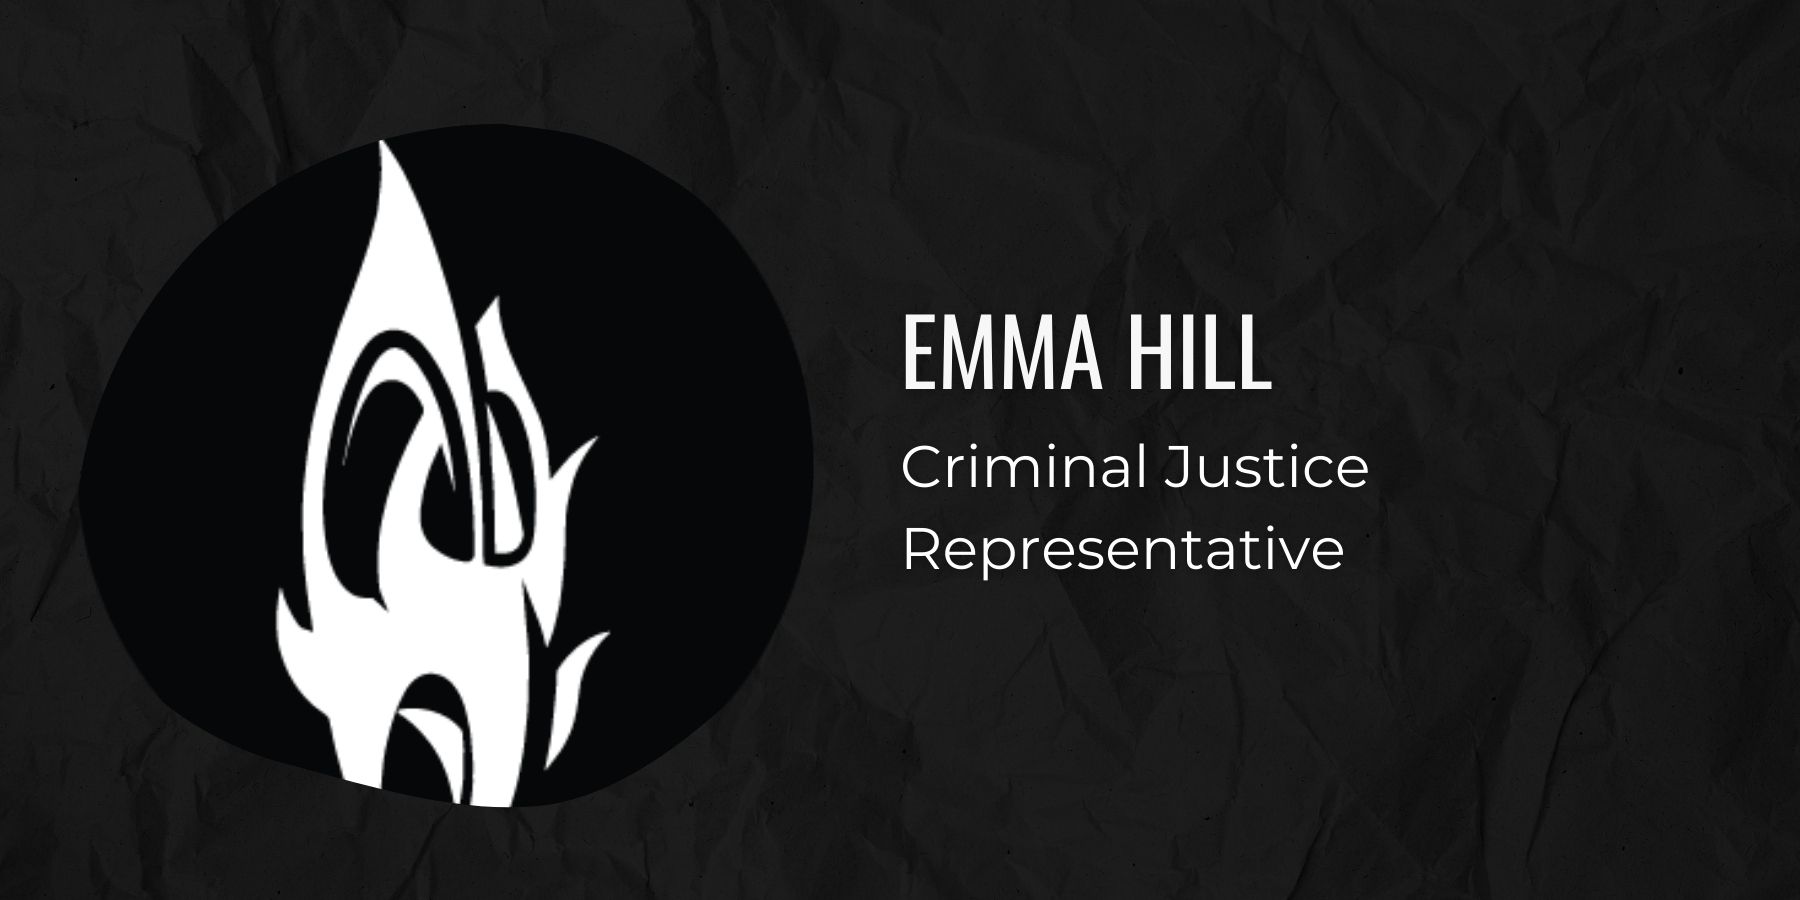 Illustration of fountain and text Emma Hill, Criminal Justice Representative